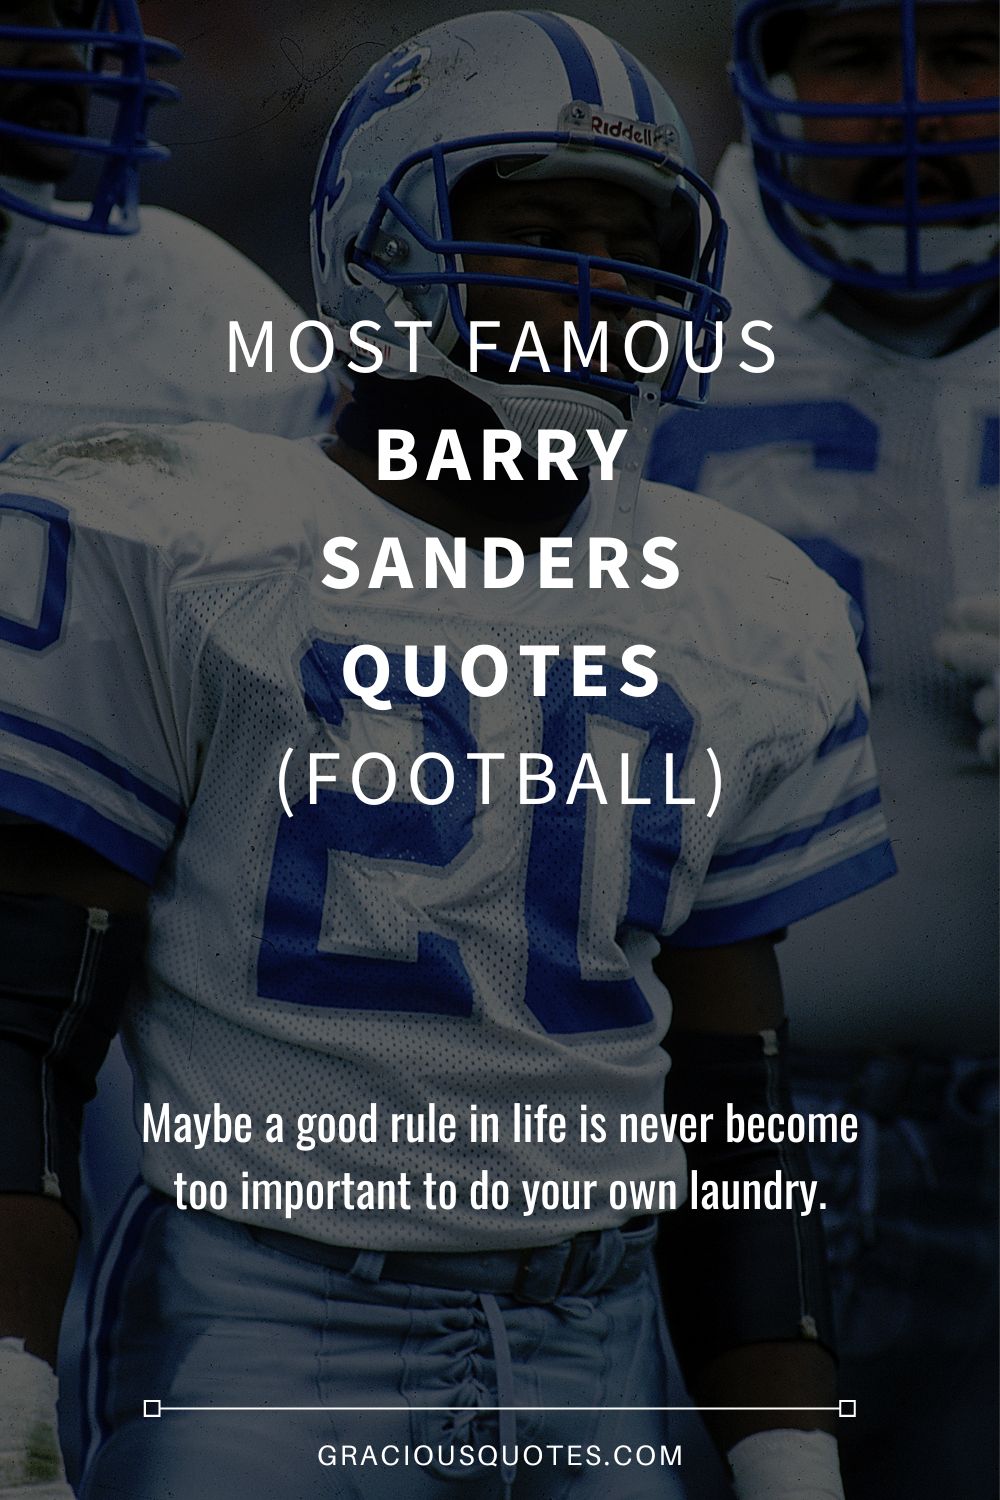 Most Famous Barry Sanders Quotes (FOOTBALL) - Gracious Quotes